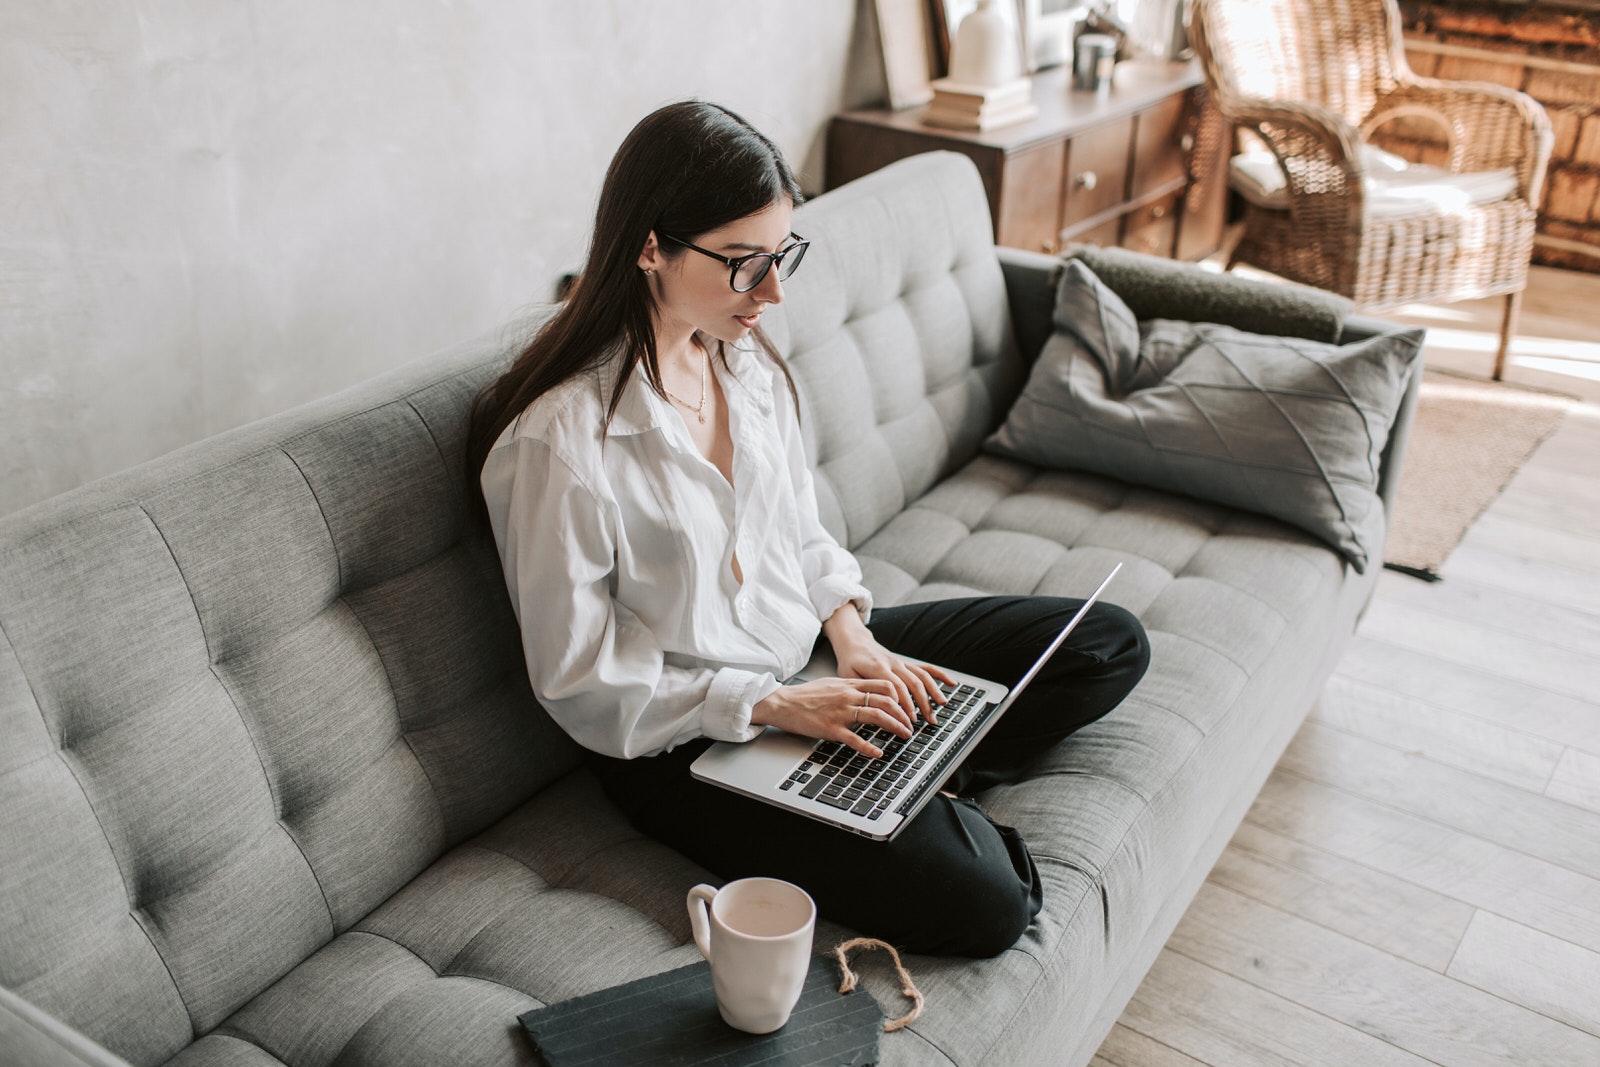 A woman on a sofa using CRM software on her laptop to manage her photography business online.